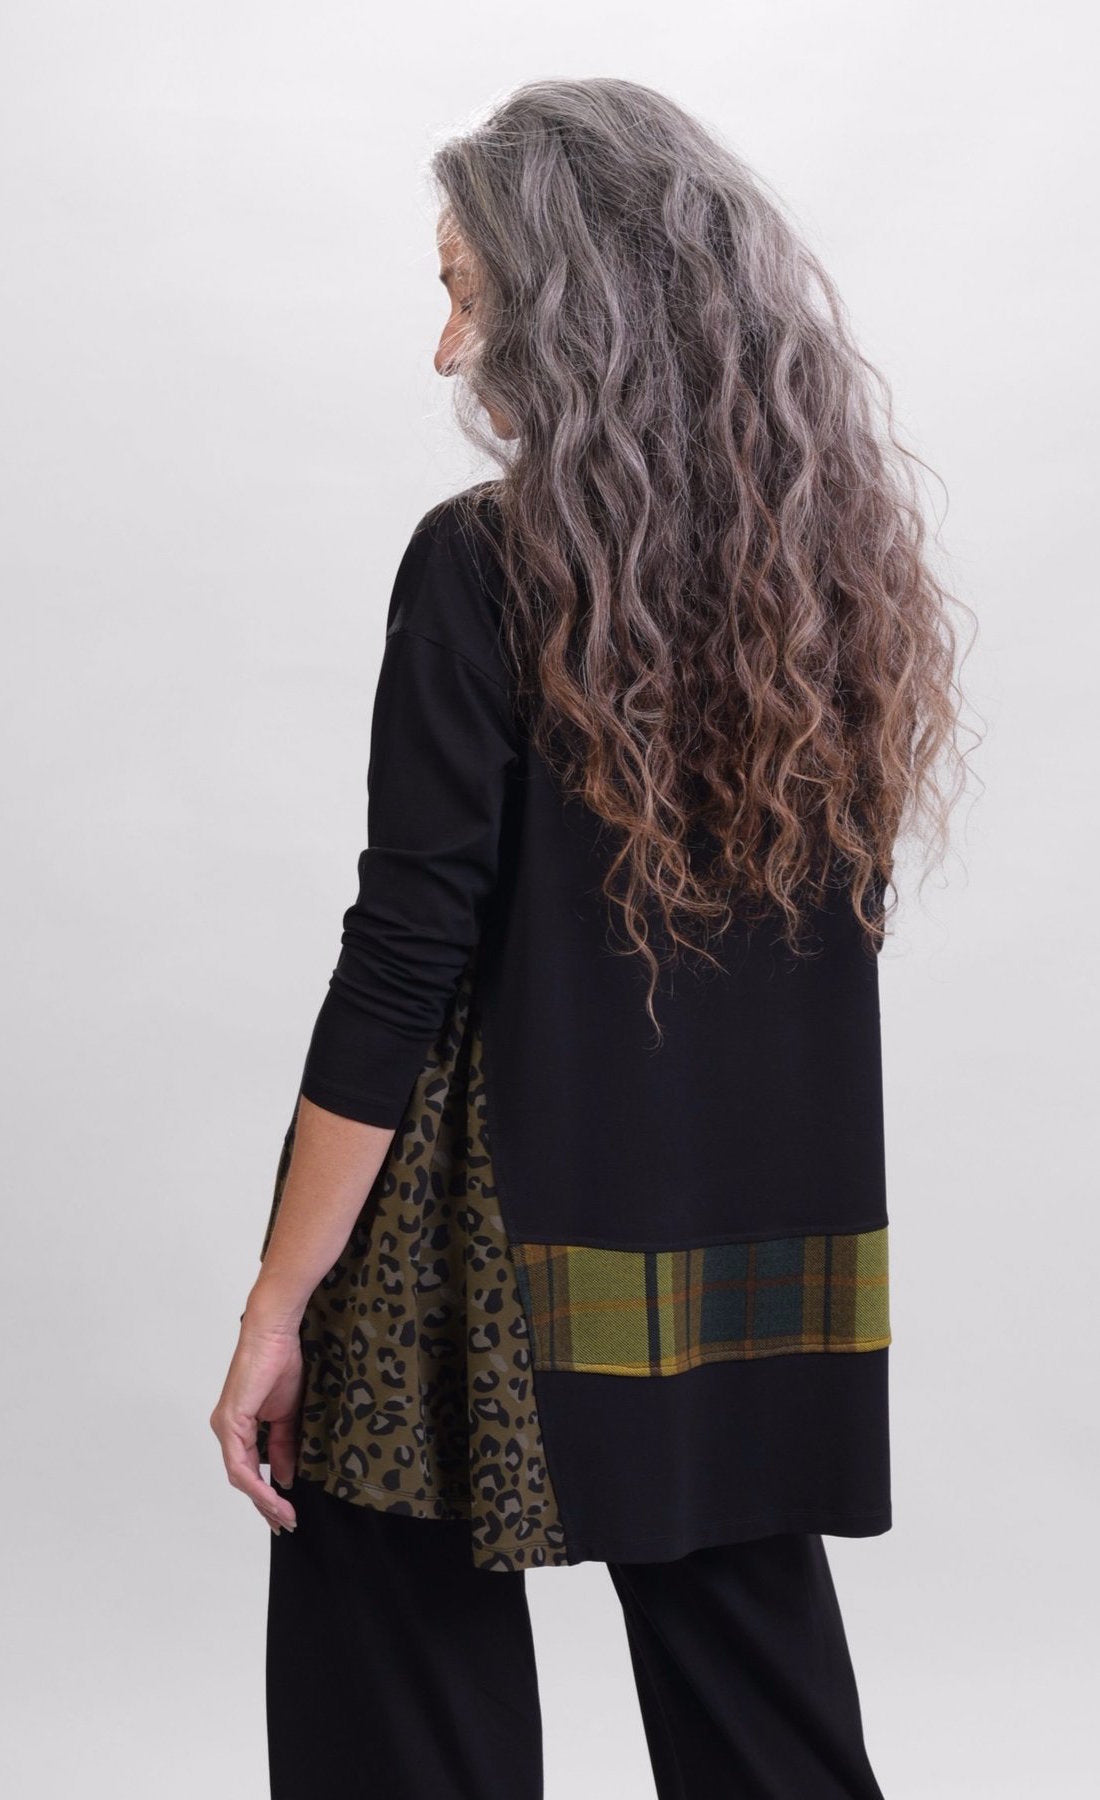 Back top half view of a woman wearing black pants and the alembika plaid asymmetry top. This top is black with a cheetah print side panel on the left side, long sleeves, and a horizontal green and yellow plaid panel running across the bottom of the top. The from hem is asymmetrical.